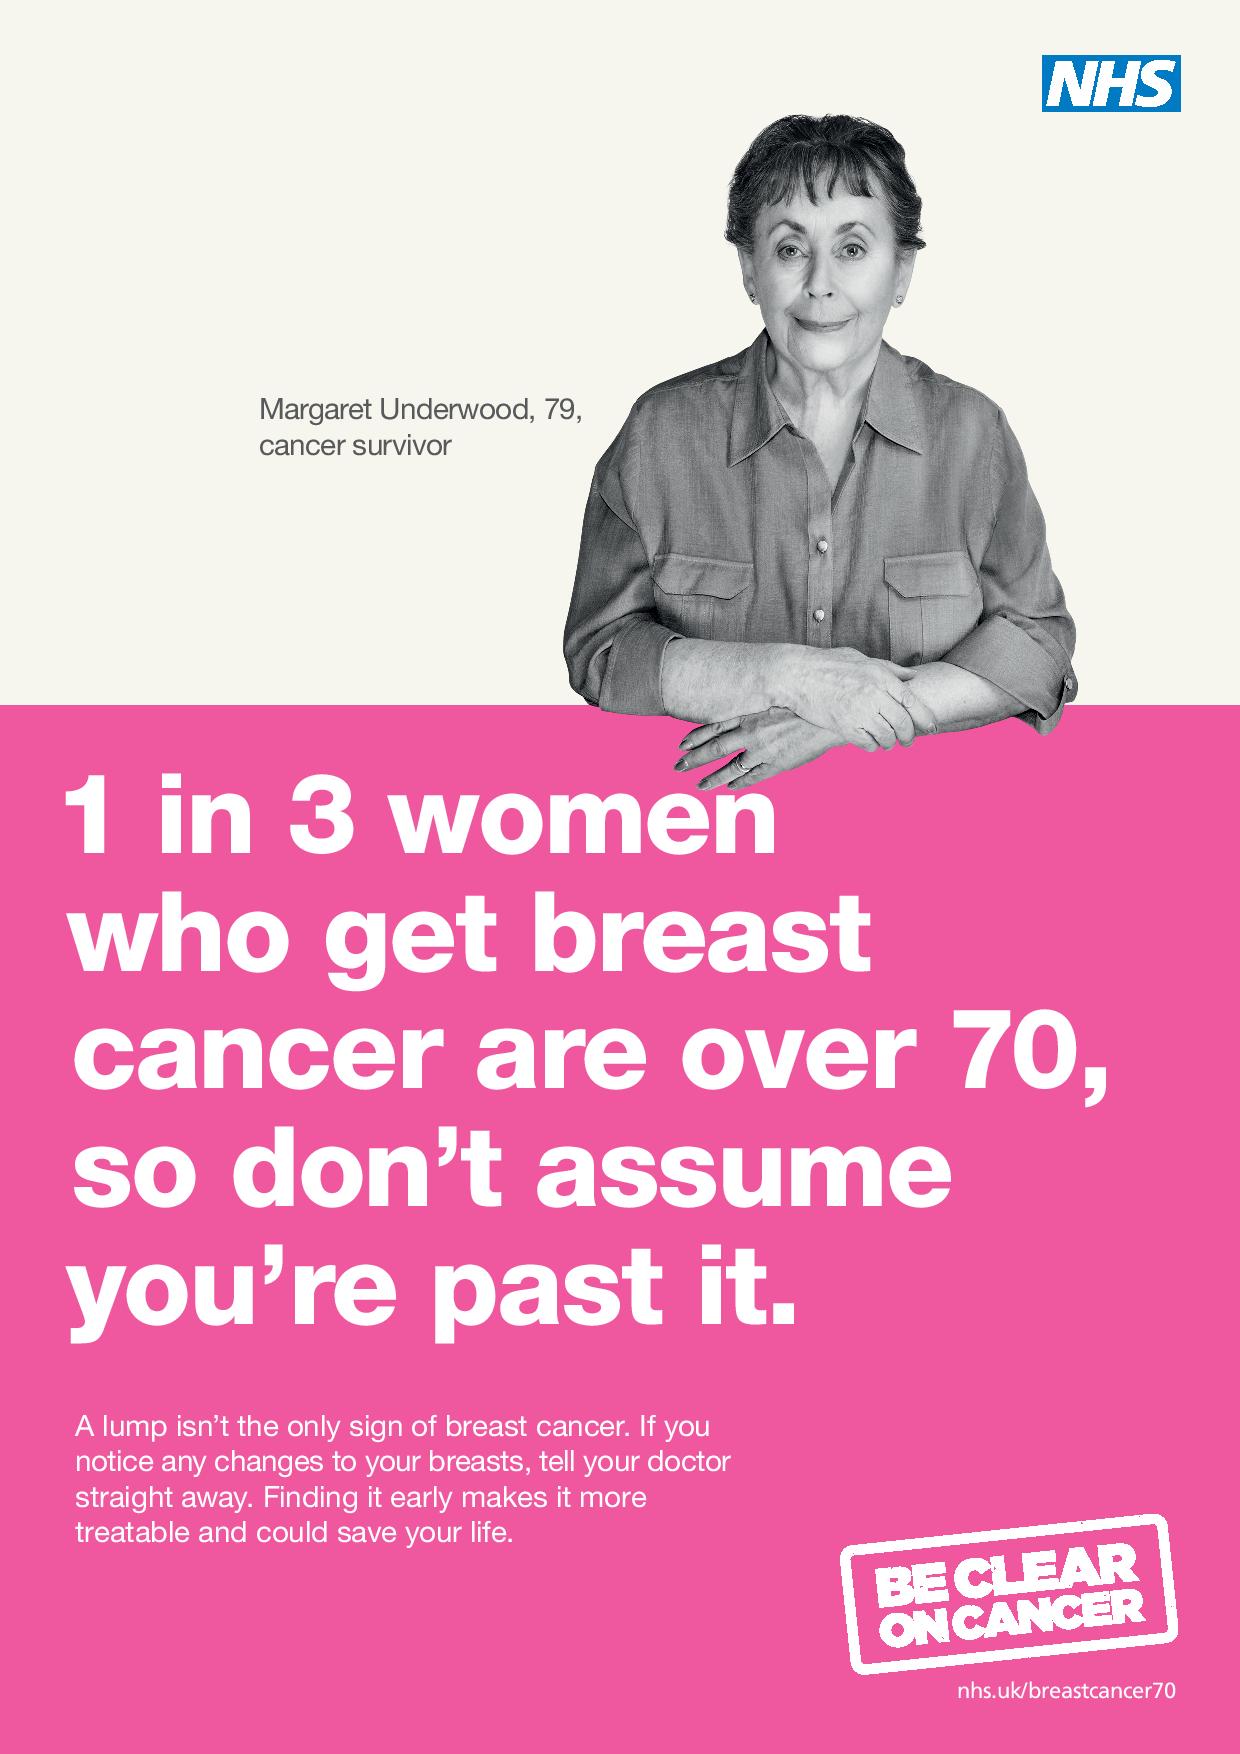 1 in 3 women who get breast cancer are over 70, so don't assume you're past it